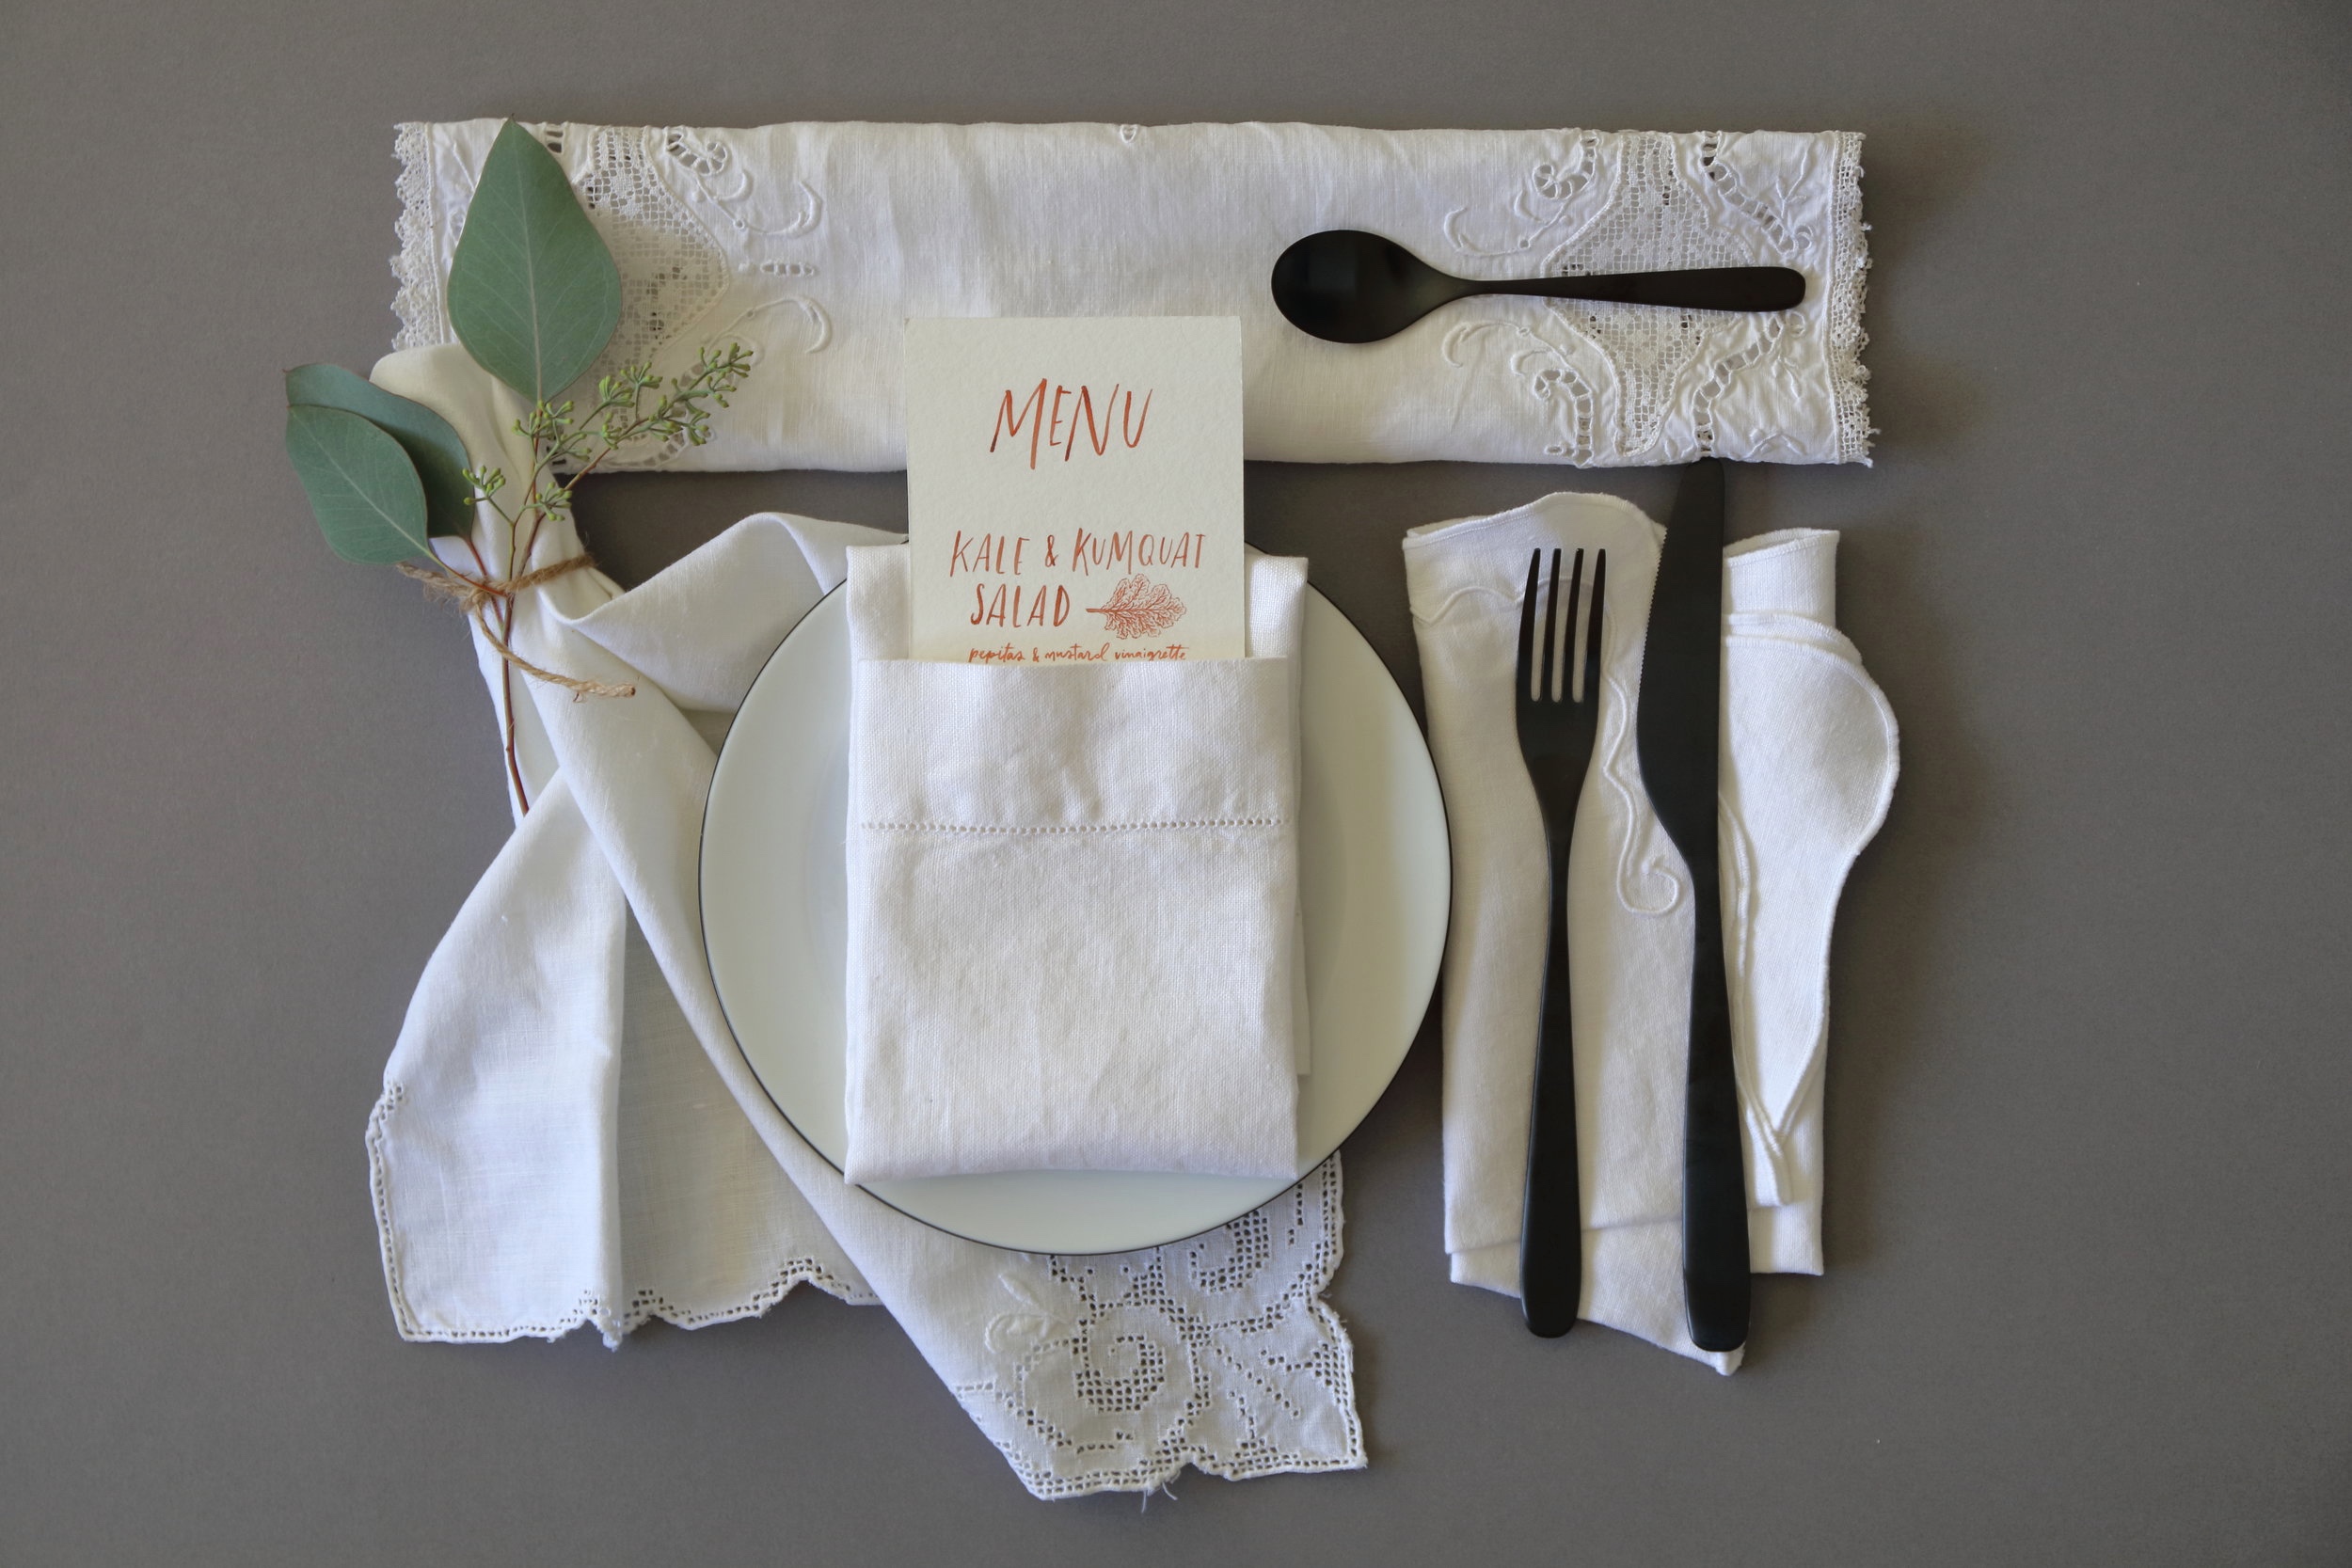  - 100% vintage linen - combination of plain and embroidered styles - Variable sizes, starting at 15"x15" - Assorted but cohesive styles - 2 or more napkins of the same style 